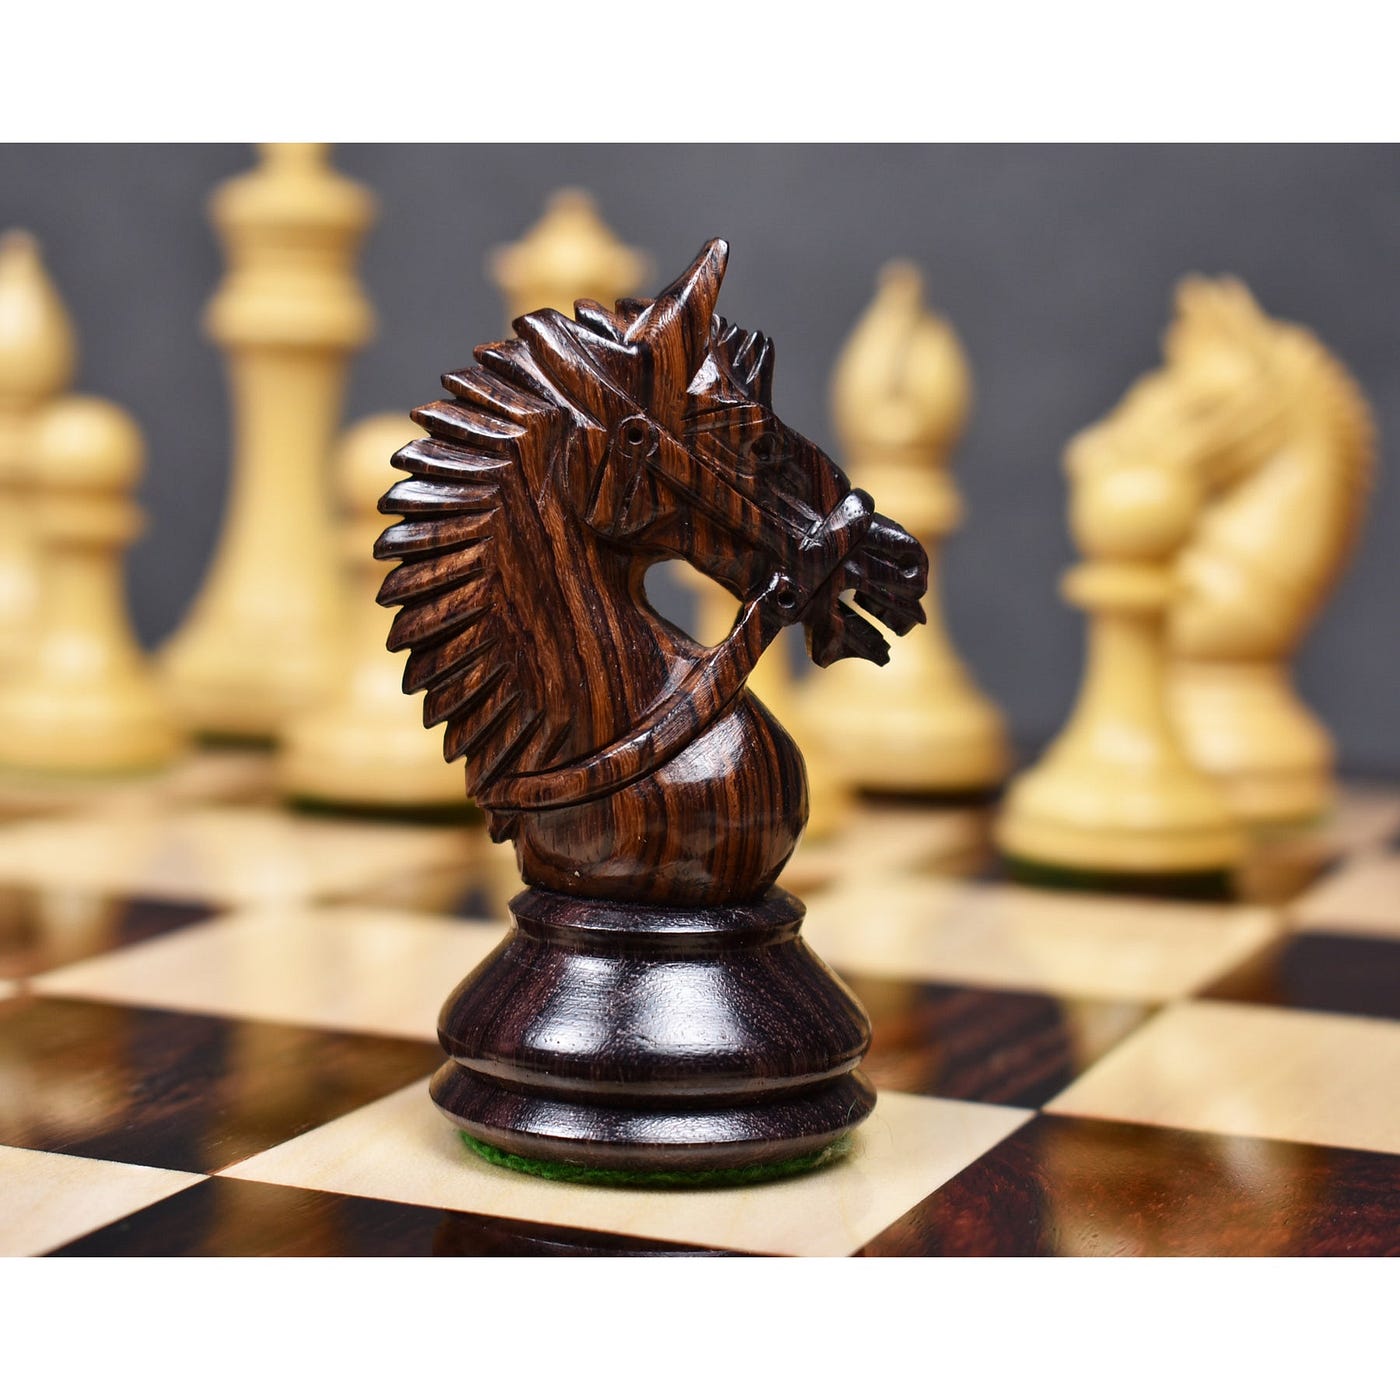 Buy Handcrafted Chess Pieces Sets & Boards at Royal Chess Mall